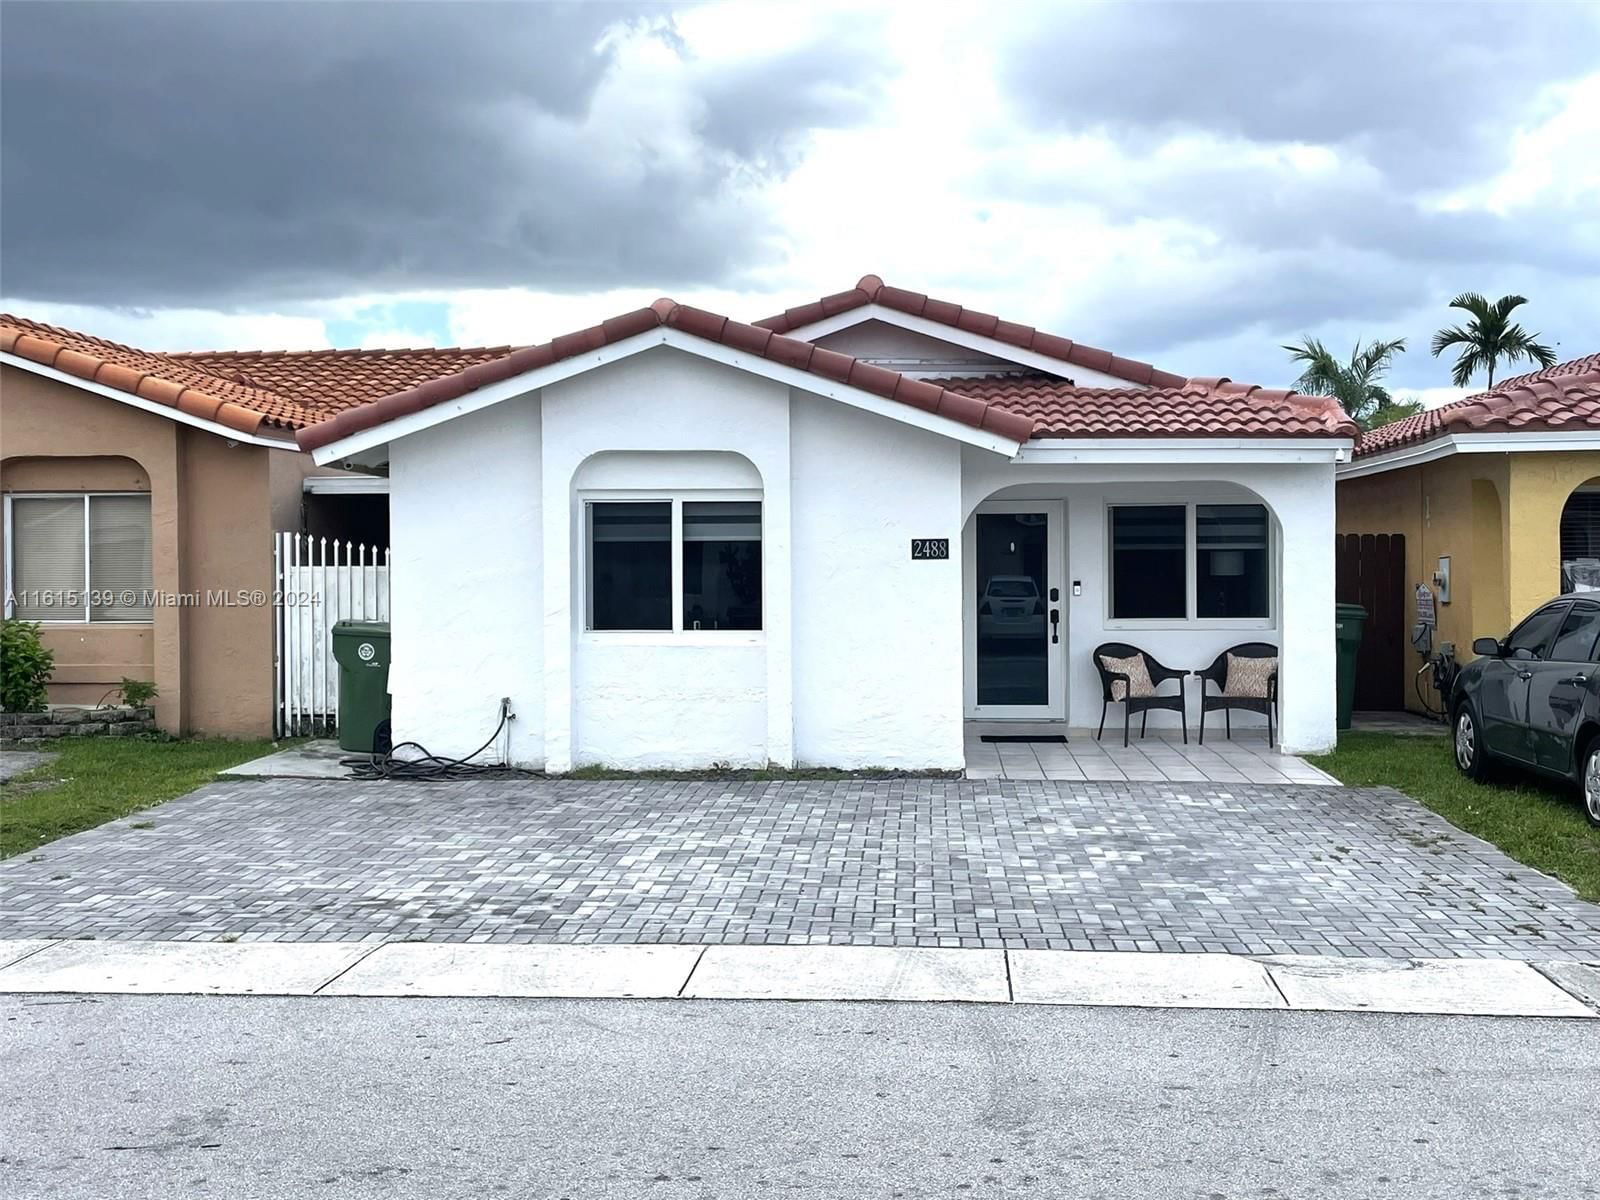 Real estate property located at 2488 65th St, Miami-Dade County, EL PRADO BY THE LAKE, Hialeah, FL